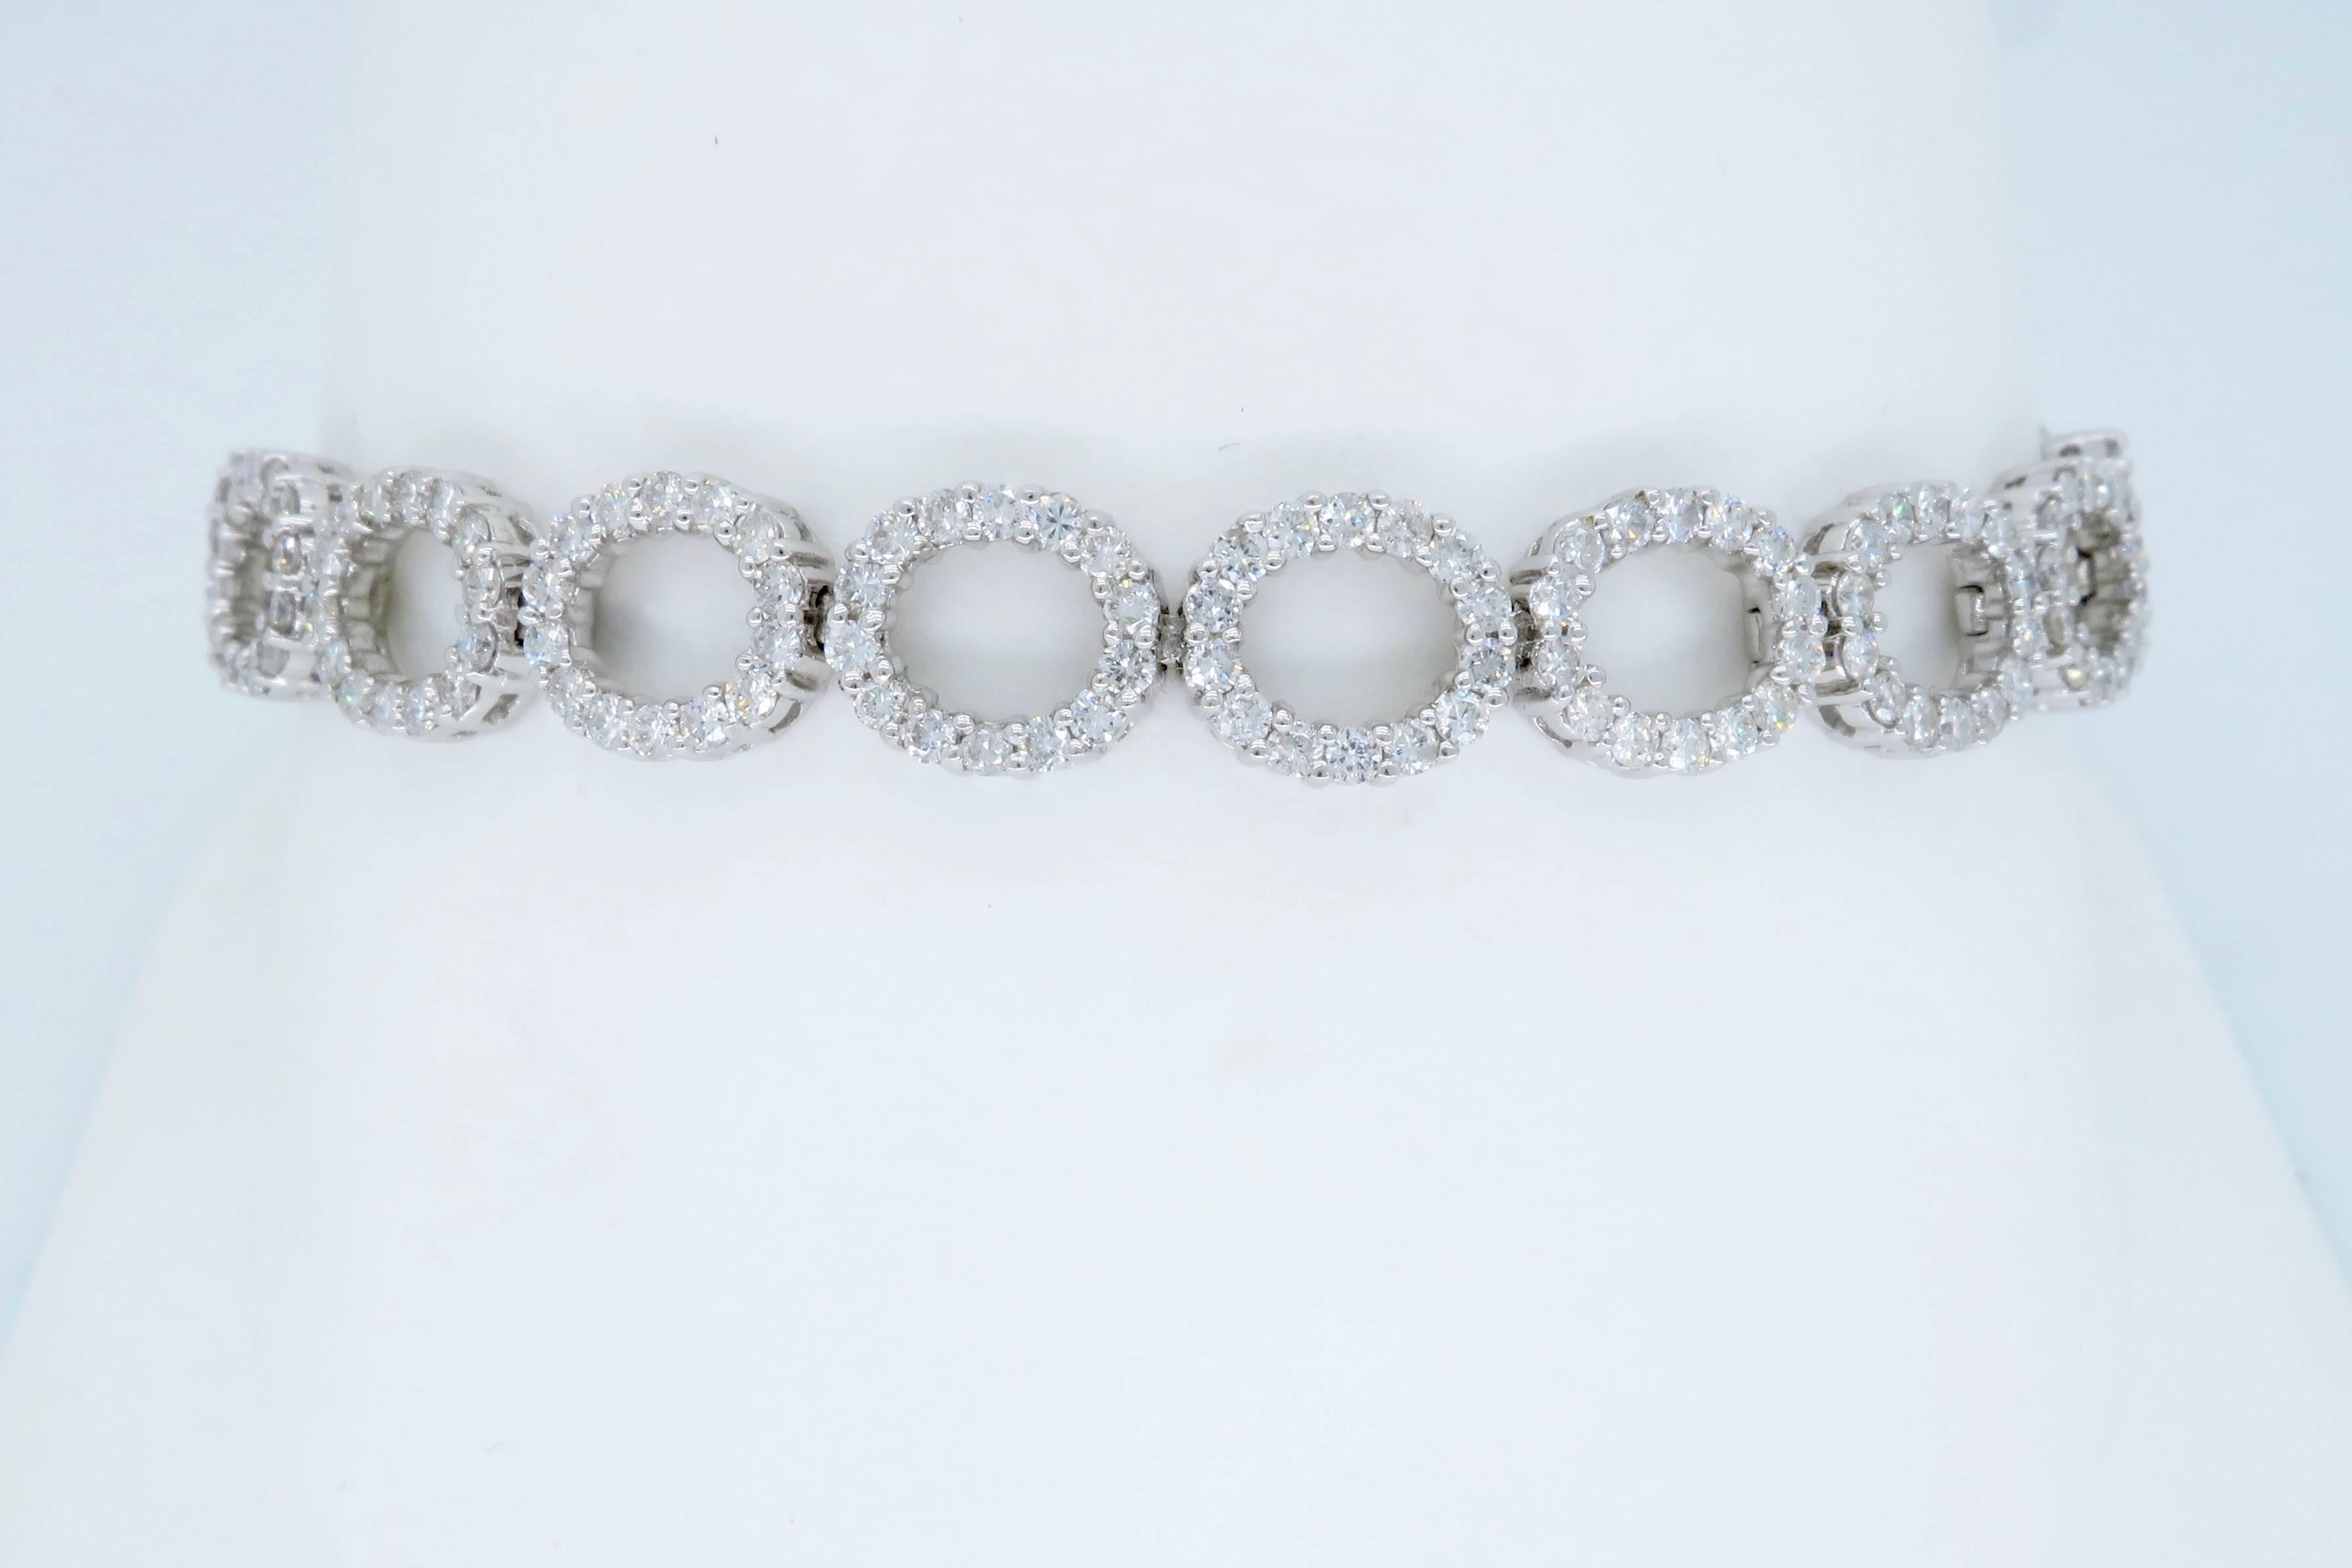 This stunning 18k White Gold bracelet features 270 Round Brilliant Cut Diamonds; the featured diamonds display an average color of G-I and average clarity of SI-I. There is approximately 4.07CTW of diamonds in this bracelet. The bracelet is 6.5” in